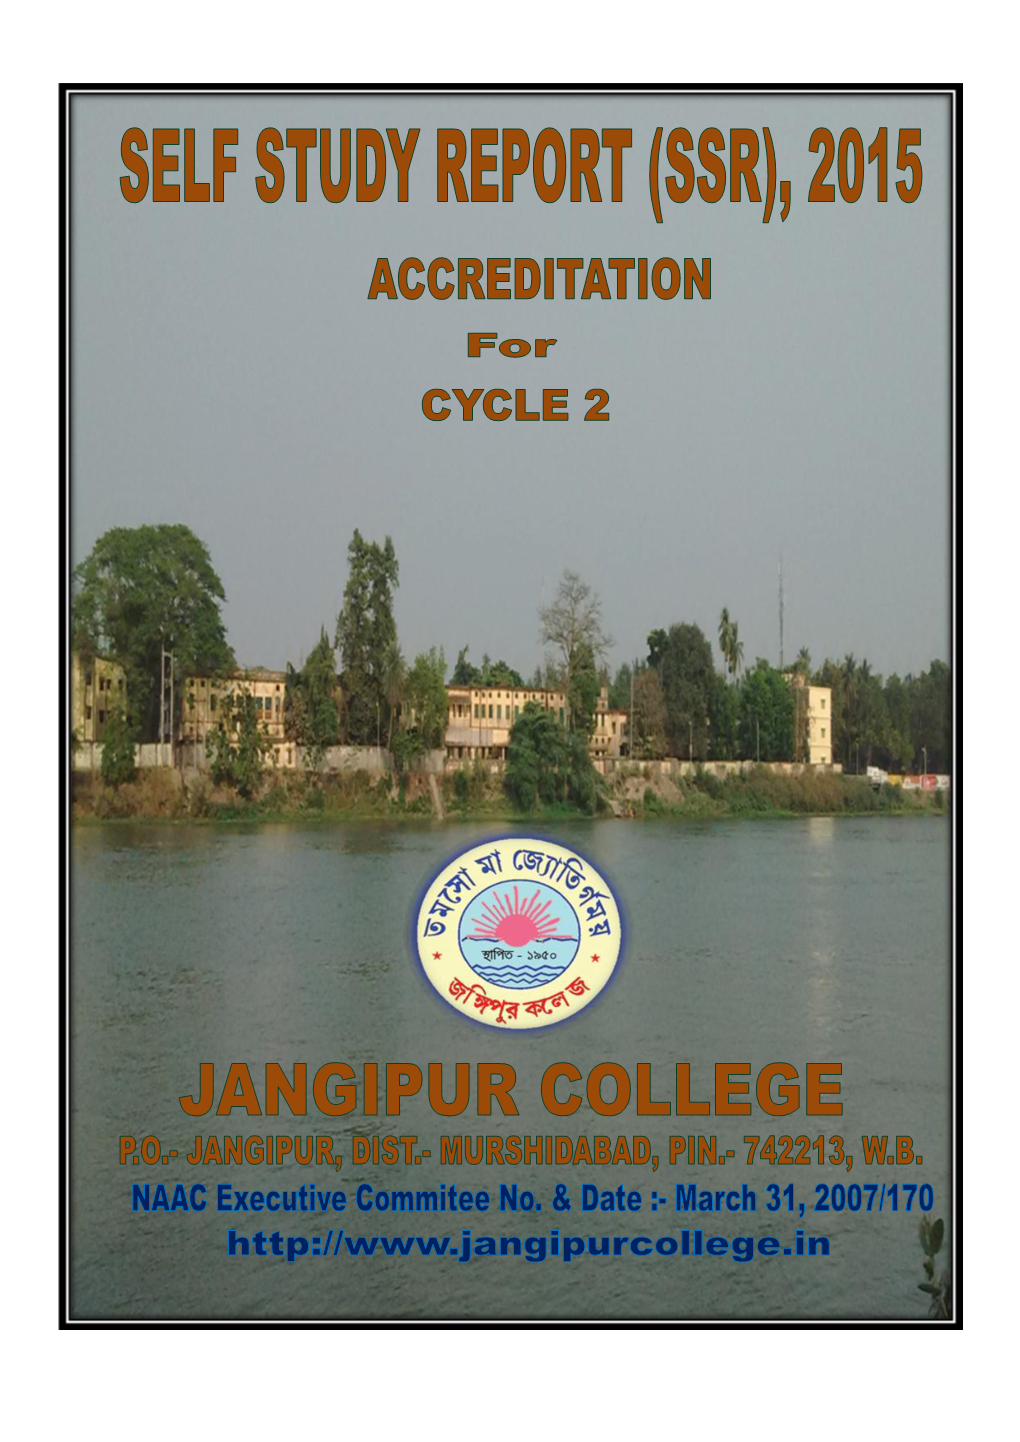 SSR) of Jangipur College for the Second Cycle of Accreditation by the National Assessment & Accreditation Council (NAAC), Bangalore